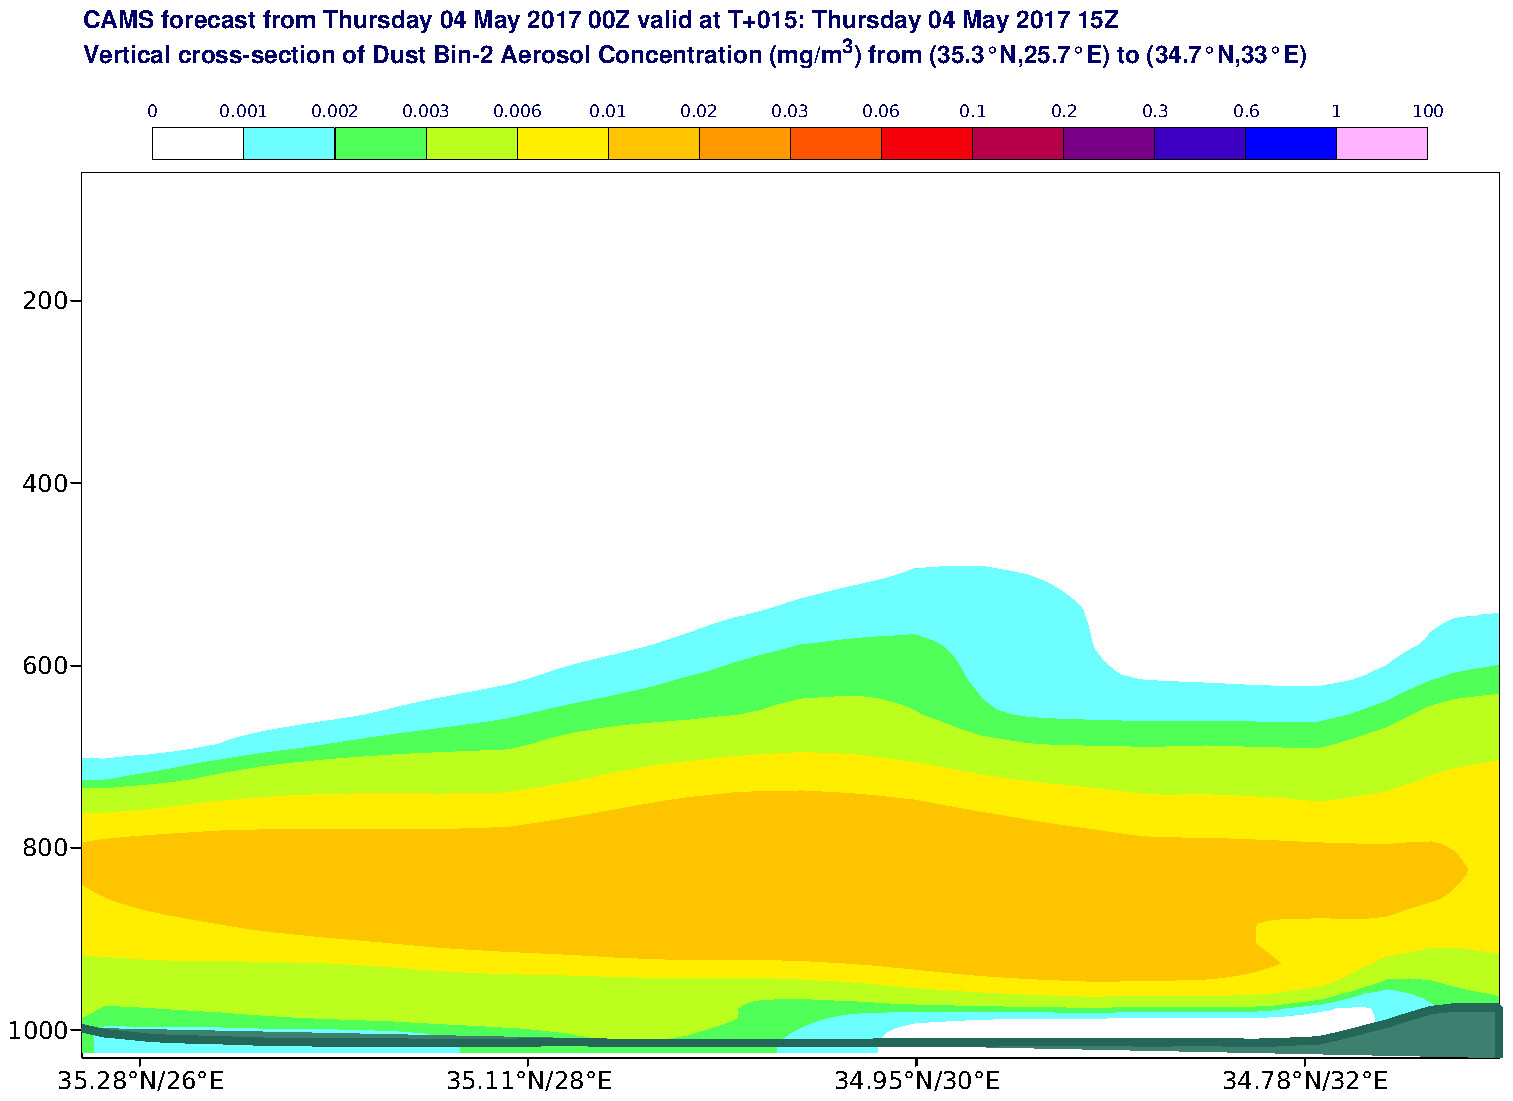 Vertical cross-section of Dust Bin-2 Aerosol Concentration (mg/m3) valid at T15 - 2017-05-04 15:00